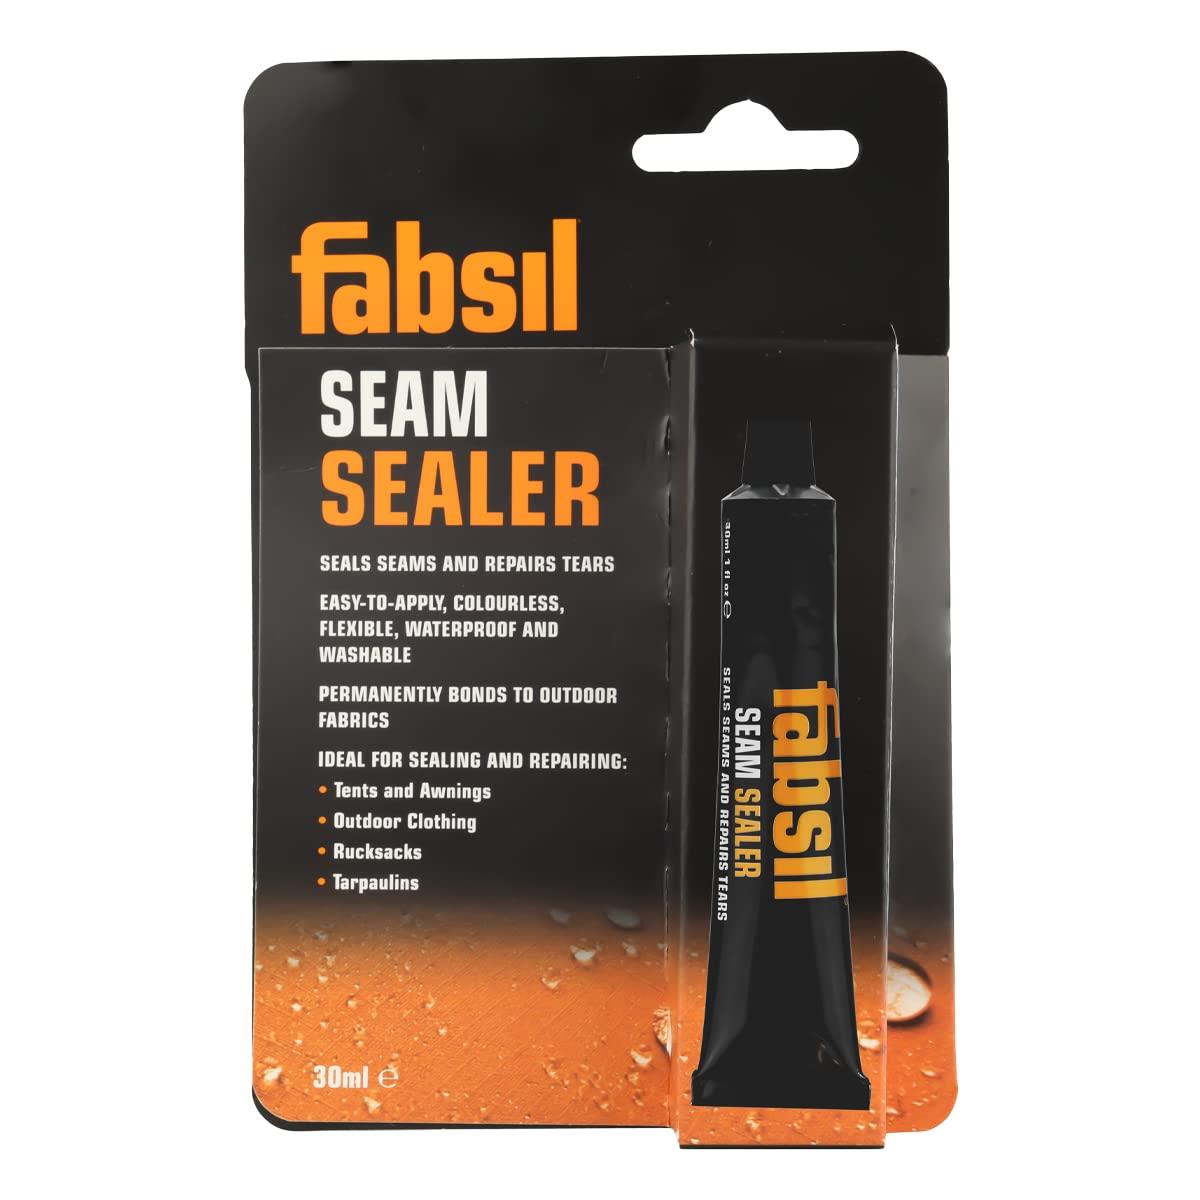 The packaging for Fabsil Seam Sealer. The text on the cardboard packaging reads "Seals seams and repairs tears. Easy-to-apply, colourless, flexible, waterproof and washable. Permanently bonds to outdoor fabrics. Ideal for sealing and repairing: tents and awnings, outdoor clothing, rucksacks, tarpaulins."